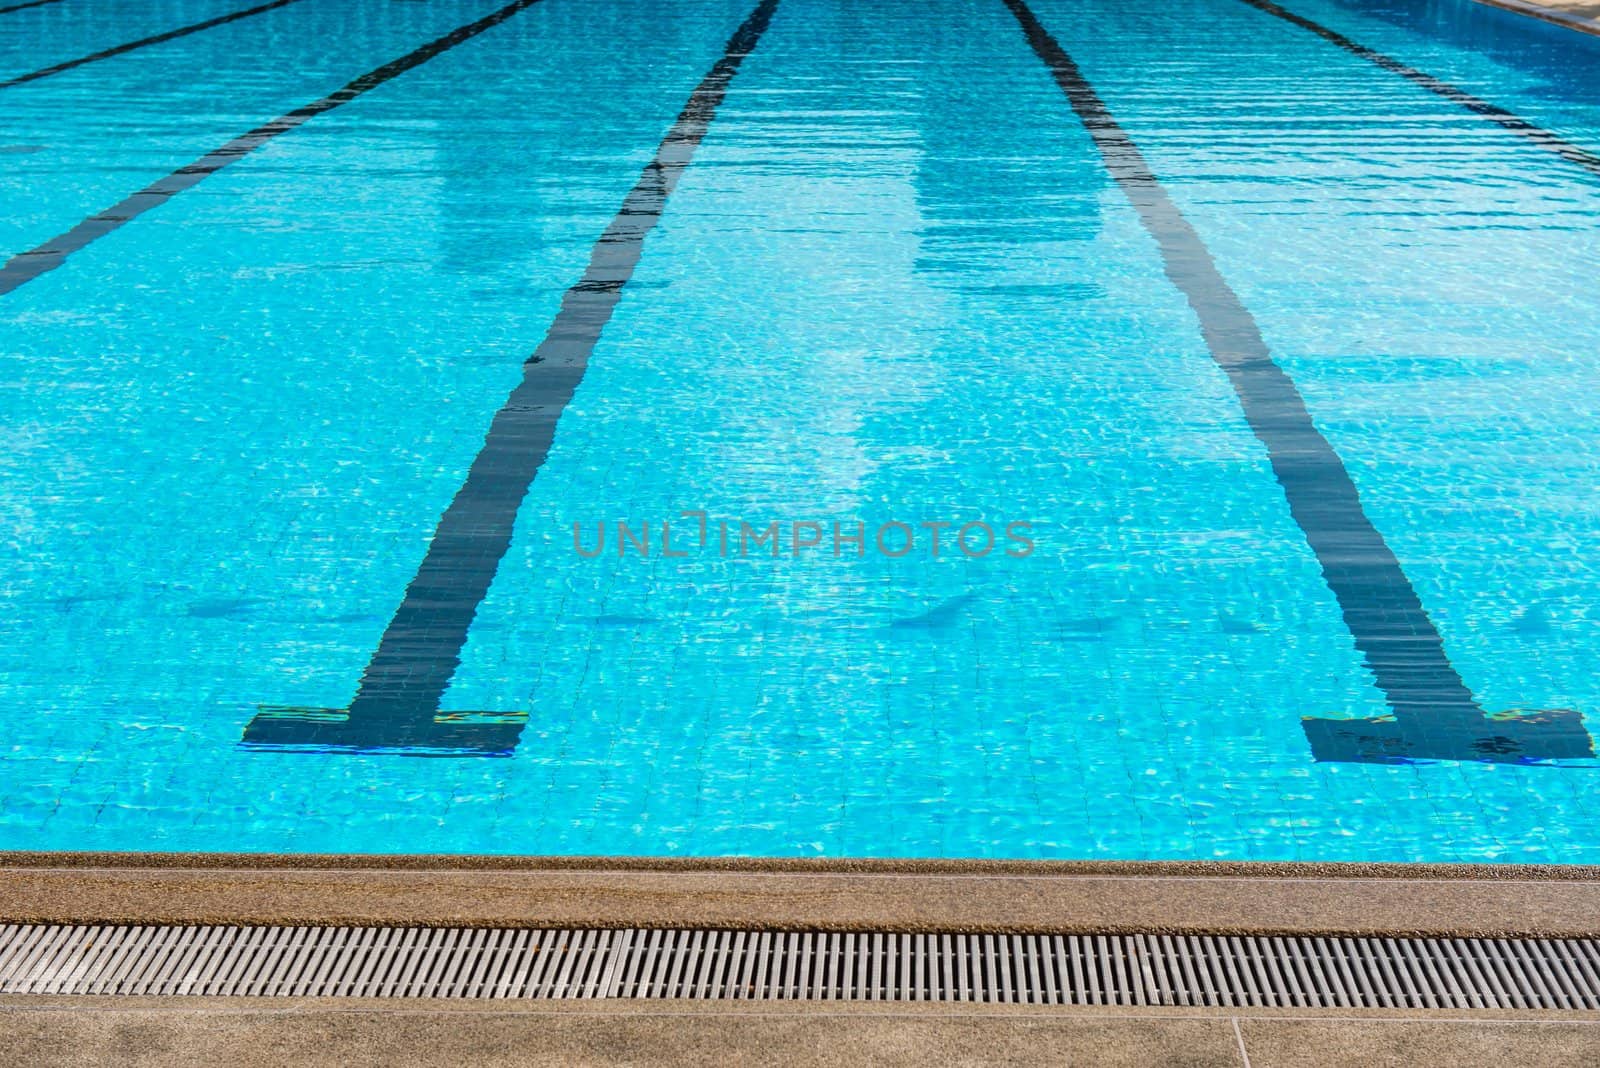 Large olympic size swimming pool with racing lanes by sasilsolutions